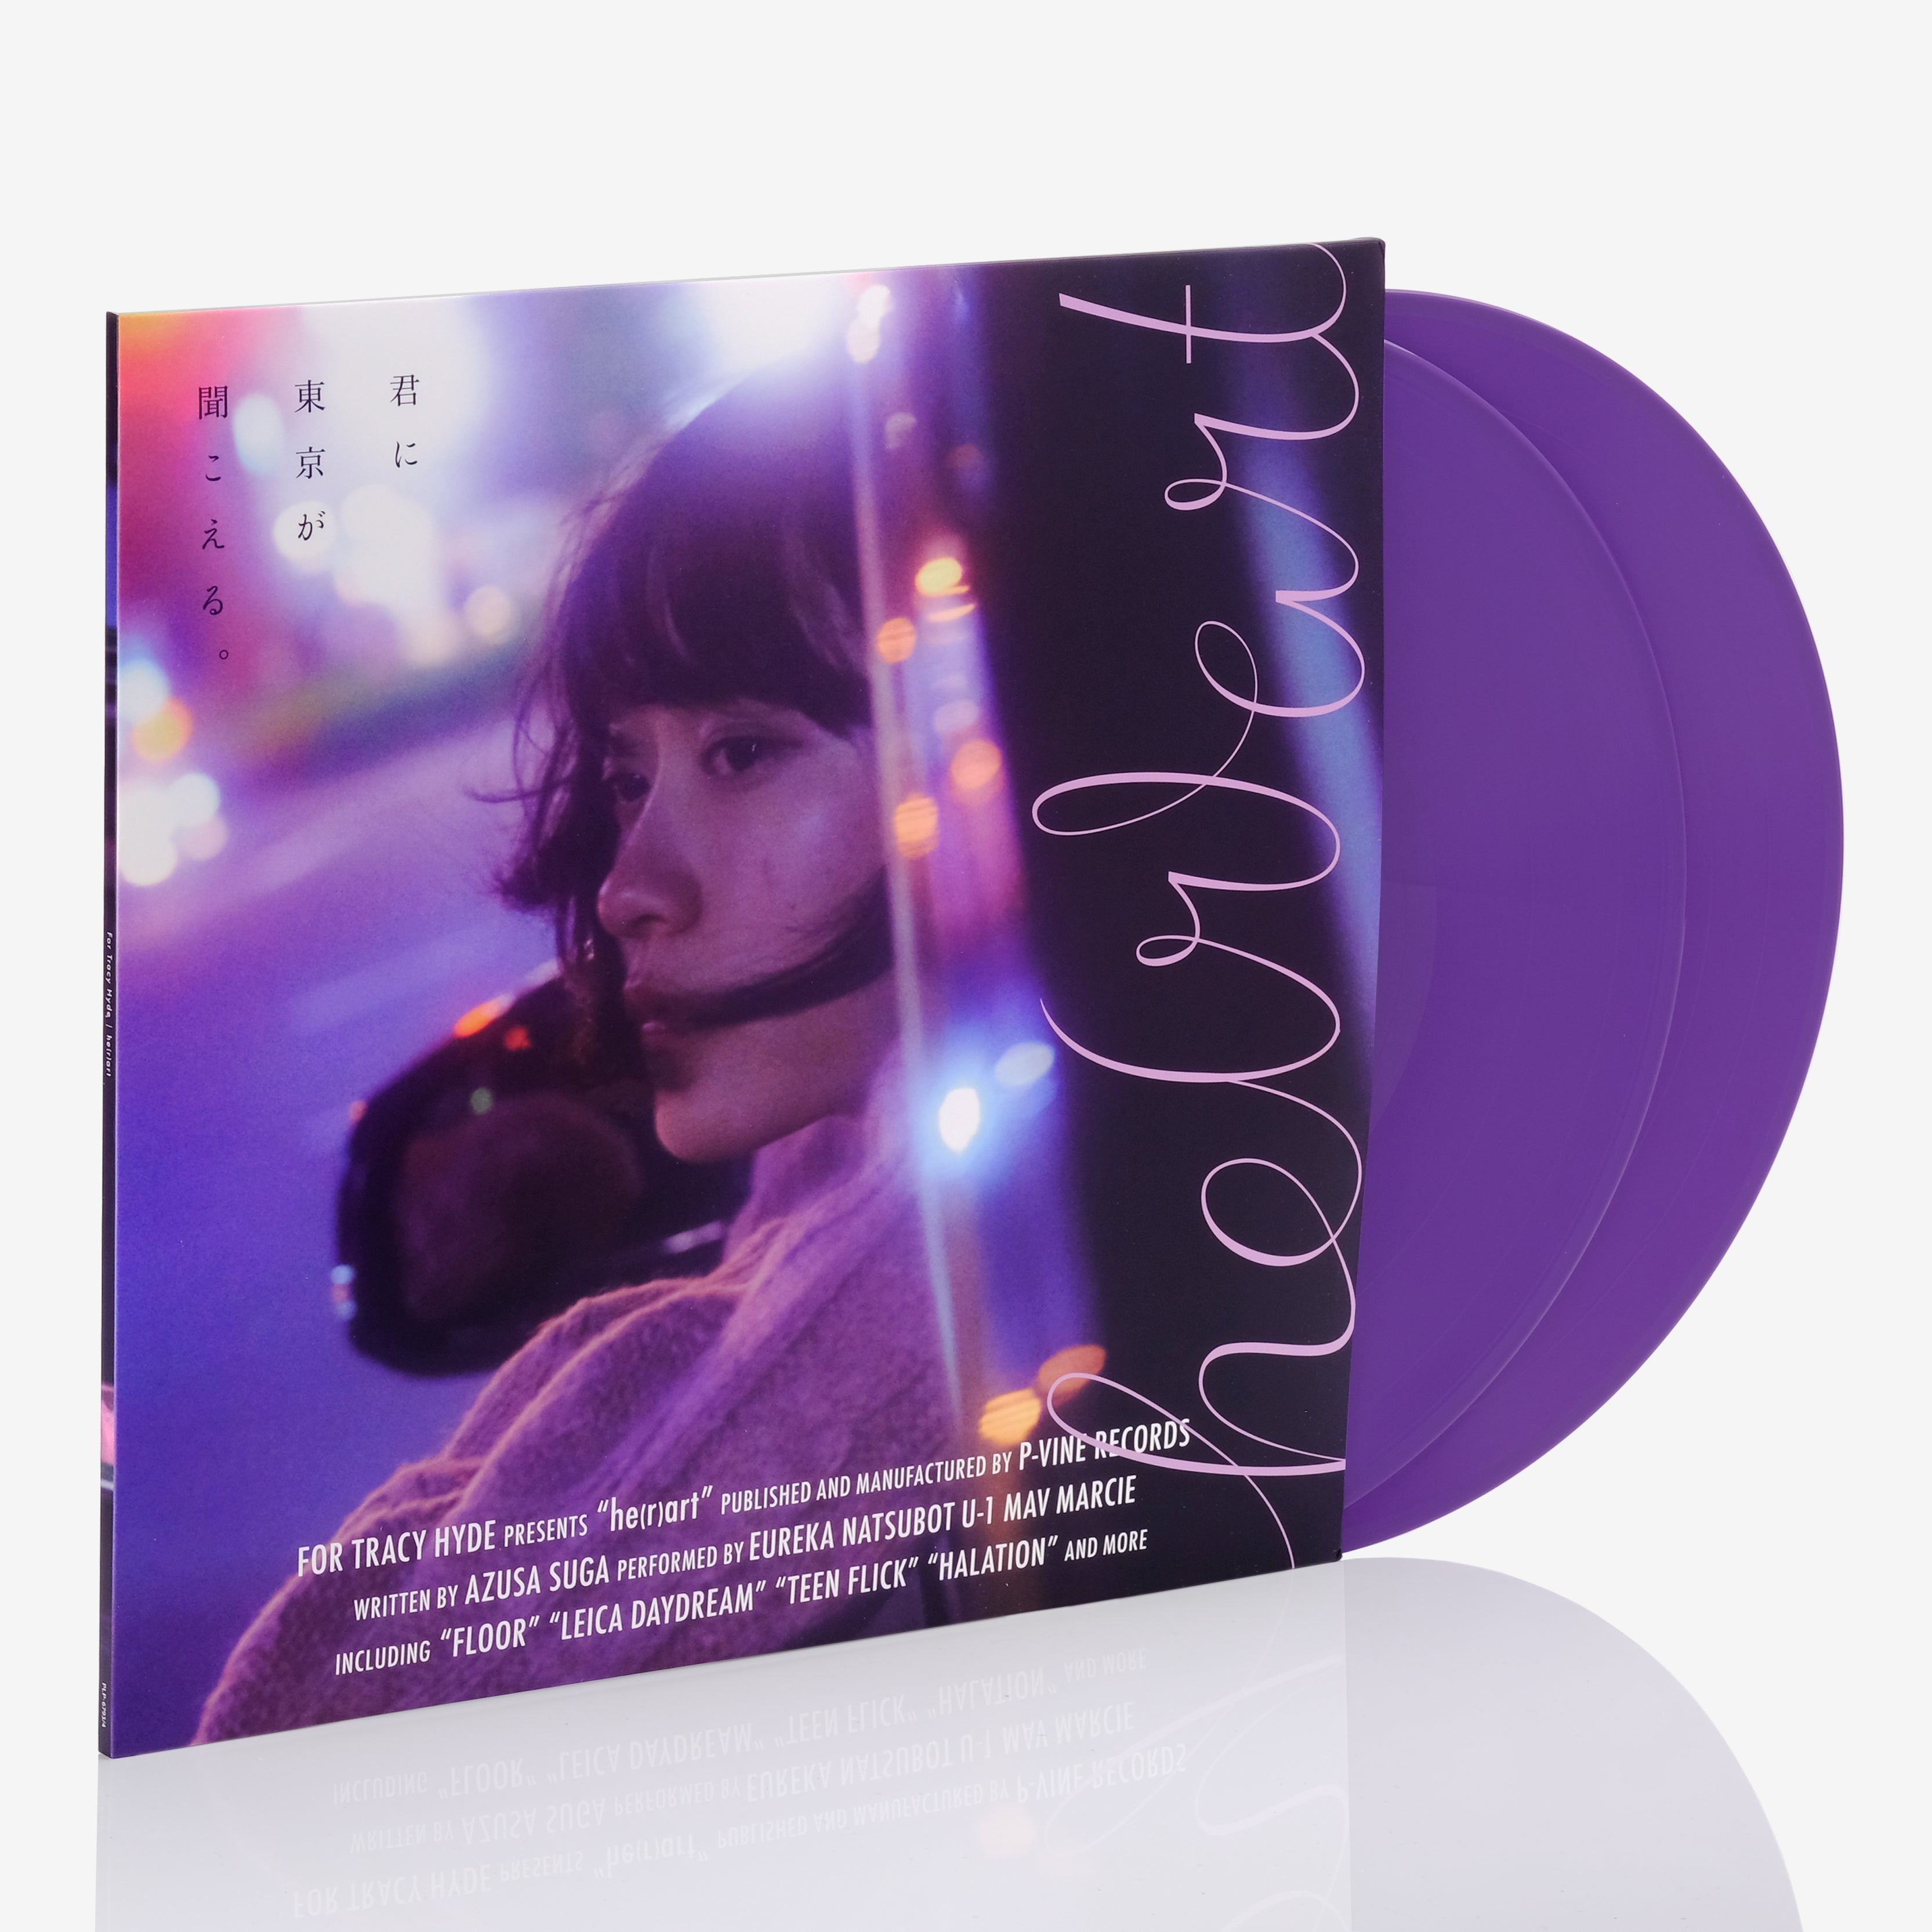 For Tracy Hyde - He(R)Art Limited Edition 2xLP Violet Vinyl Record